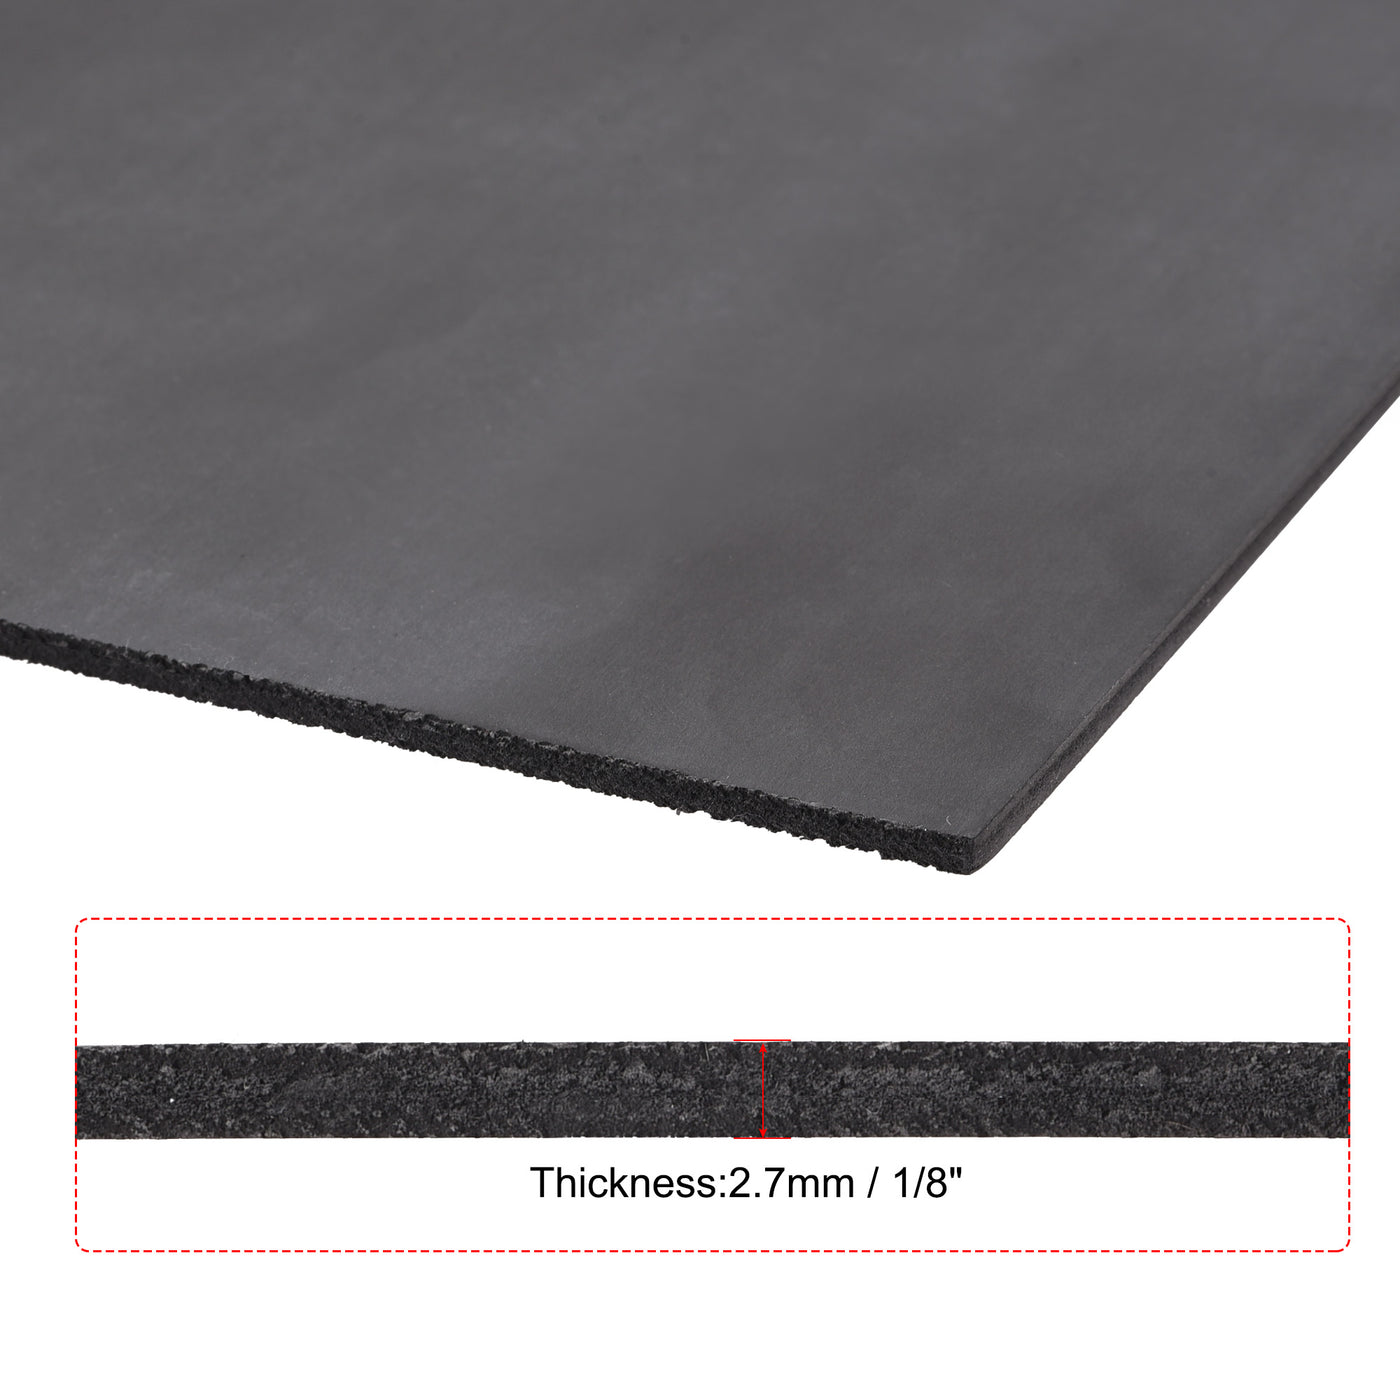 uxcell Uxcell PVC Foam Board Sheet,2.7mm x 300mm x 600mm,Black,Double Sided,Expanded PVC Sheet